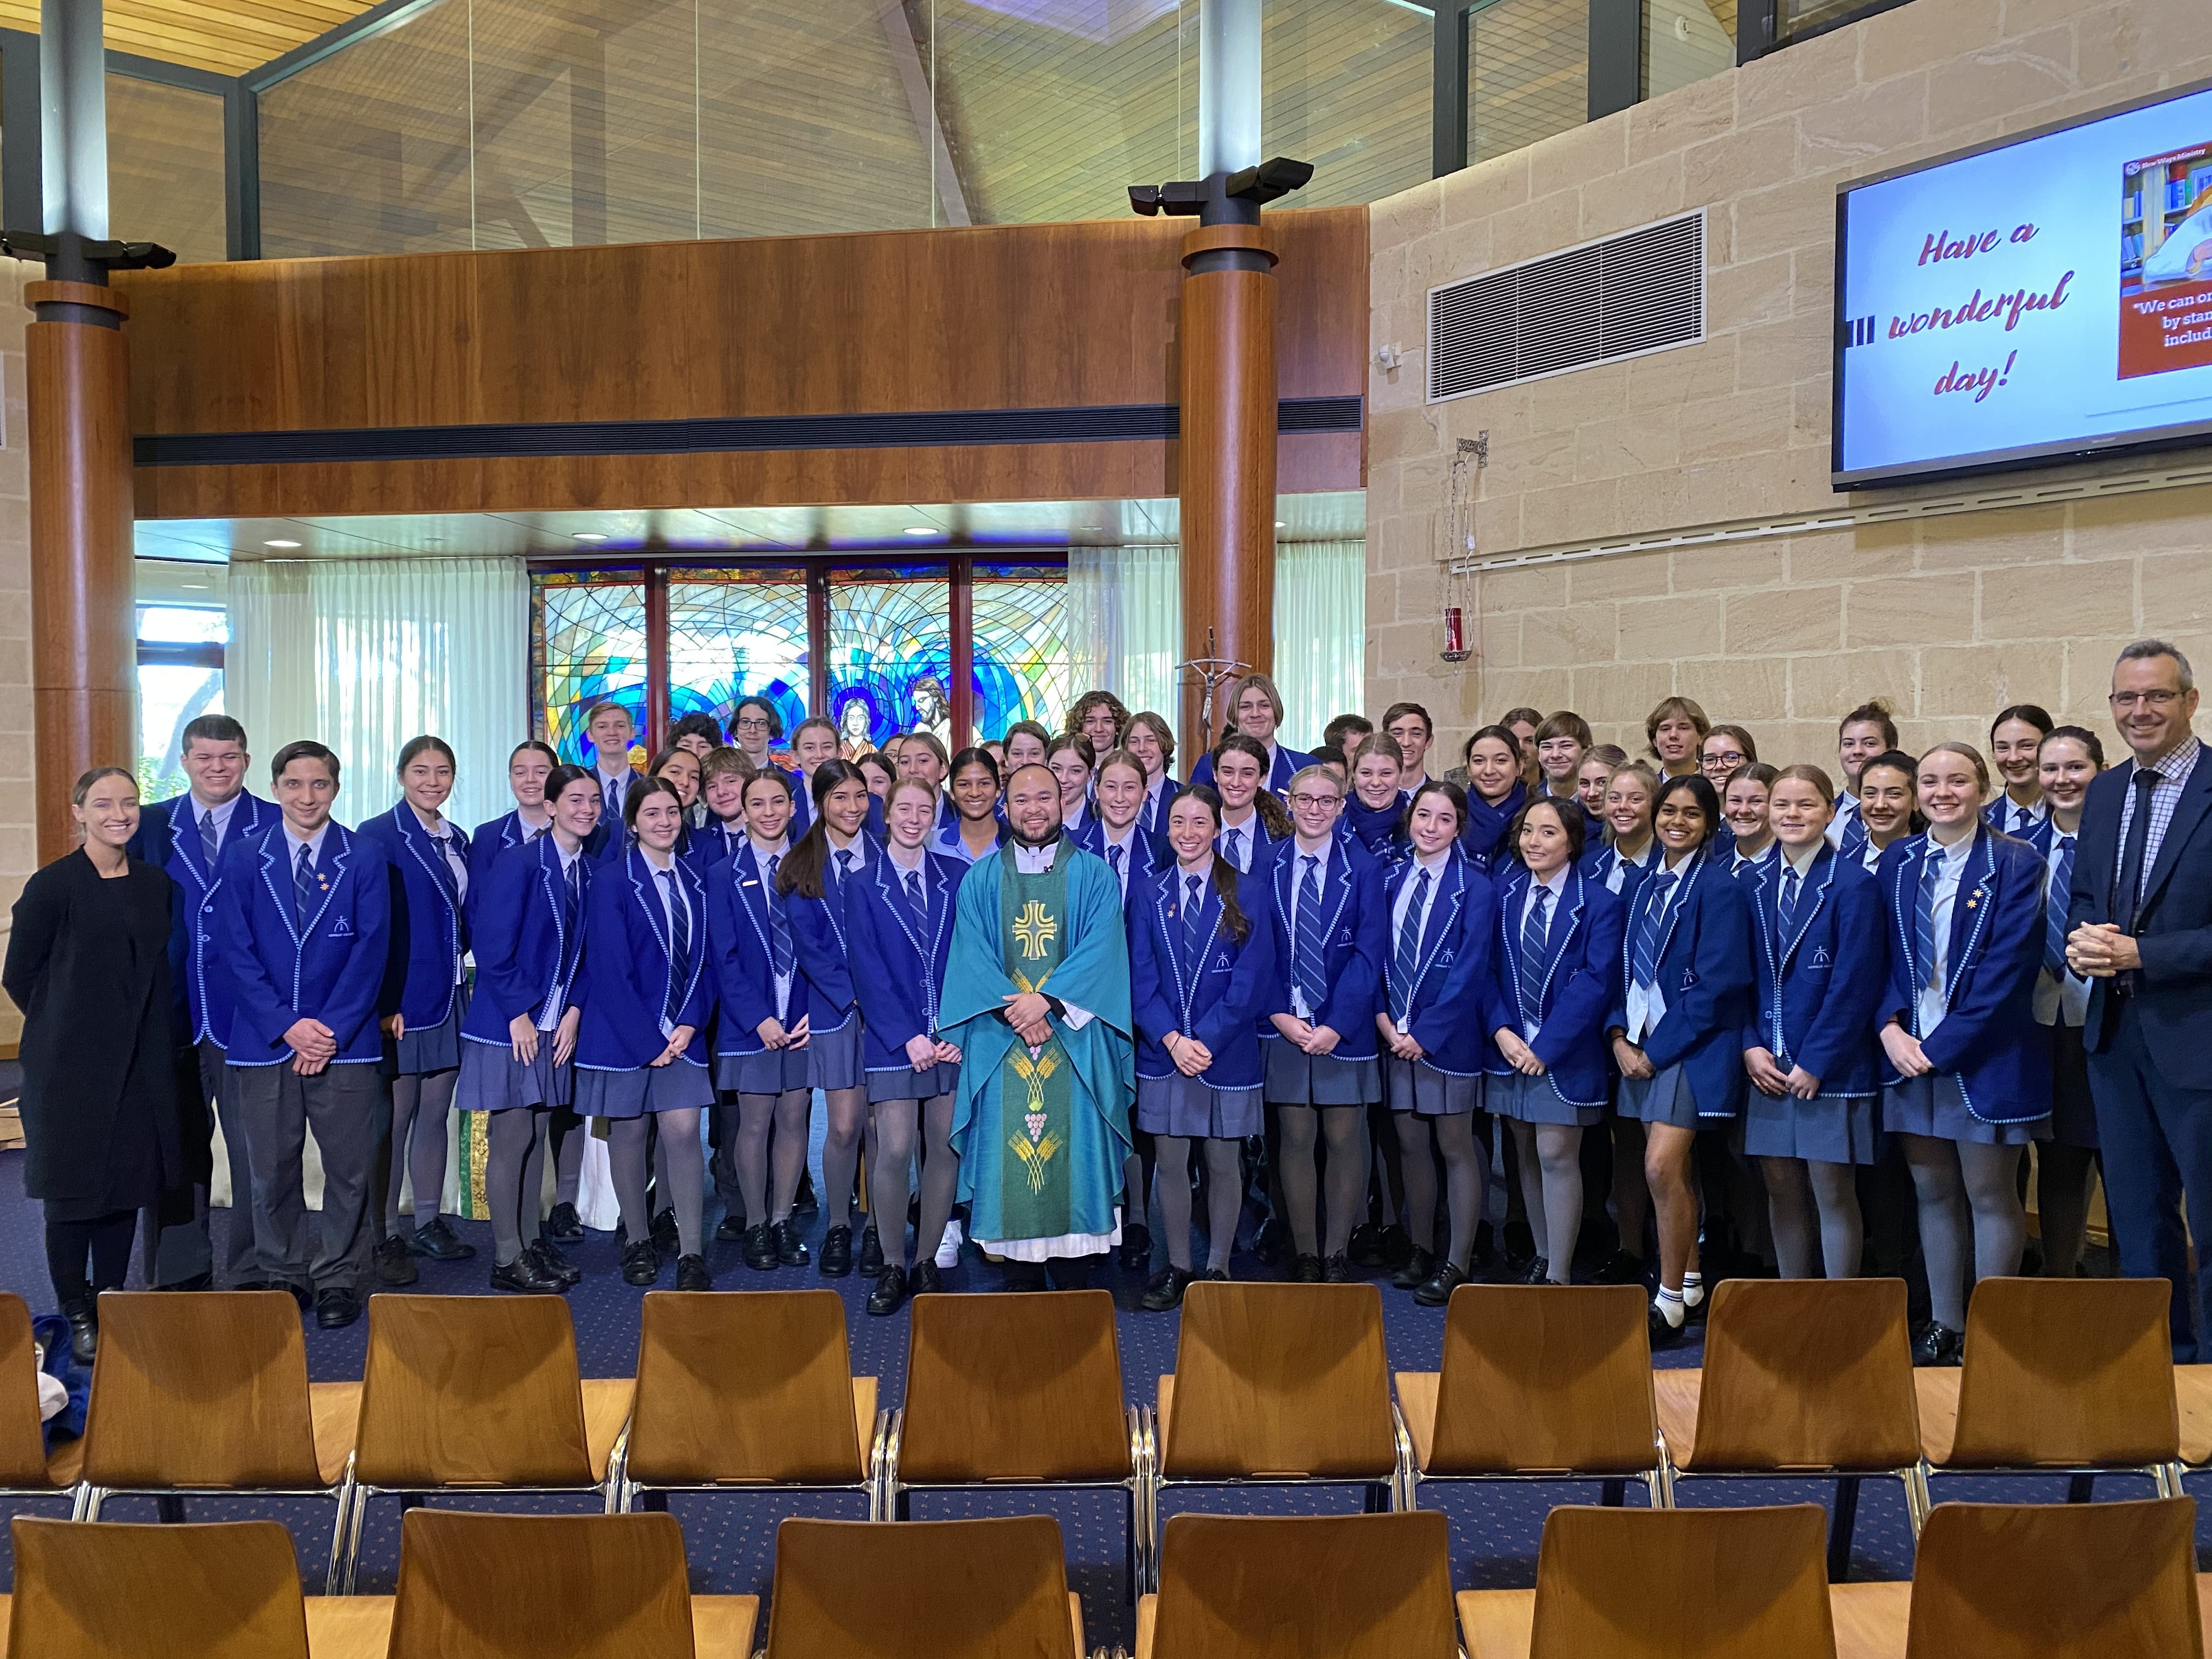 Newman News Term 3 Week 2: From the Leader of Mission and Catholic Identity